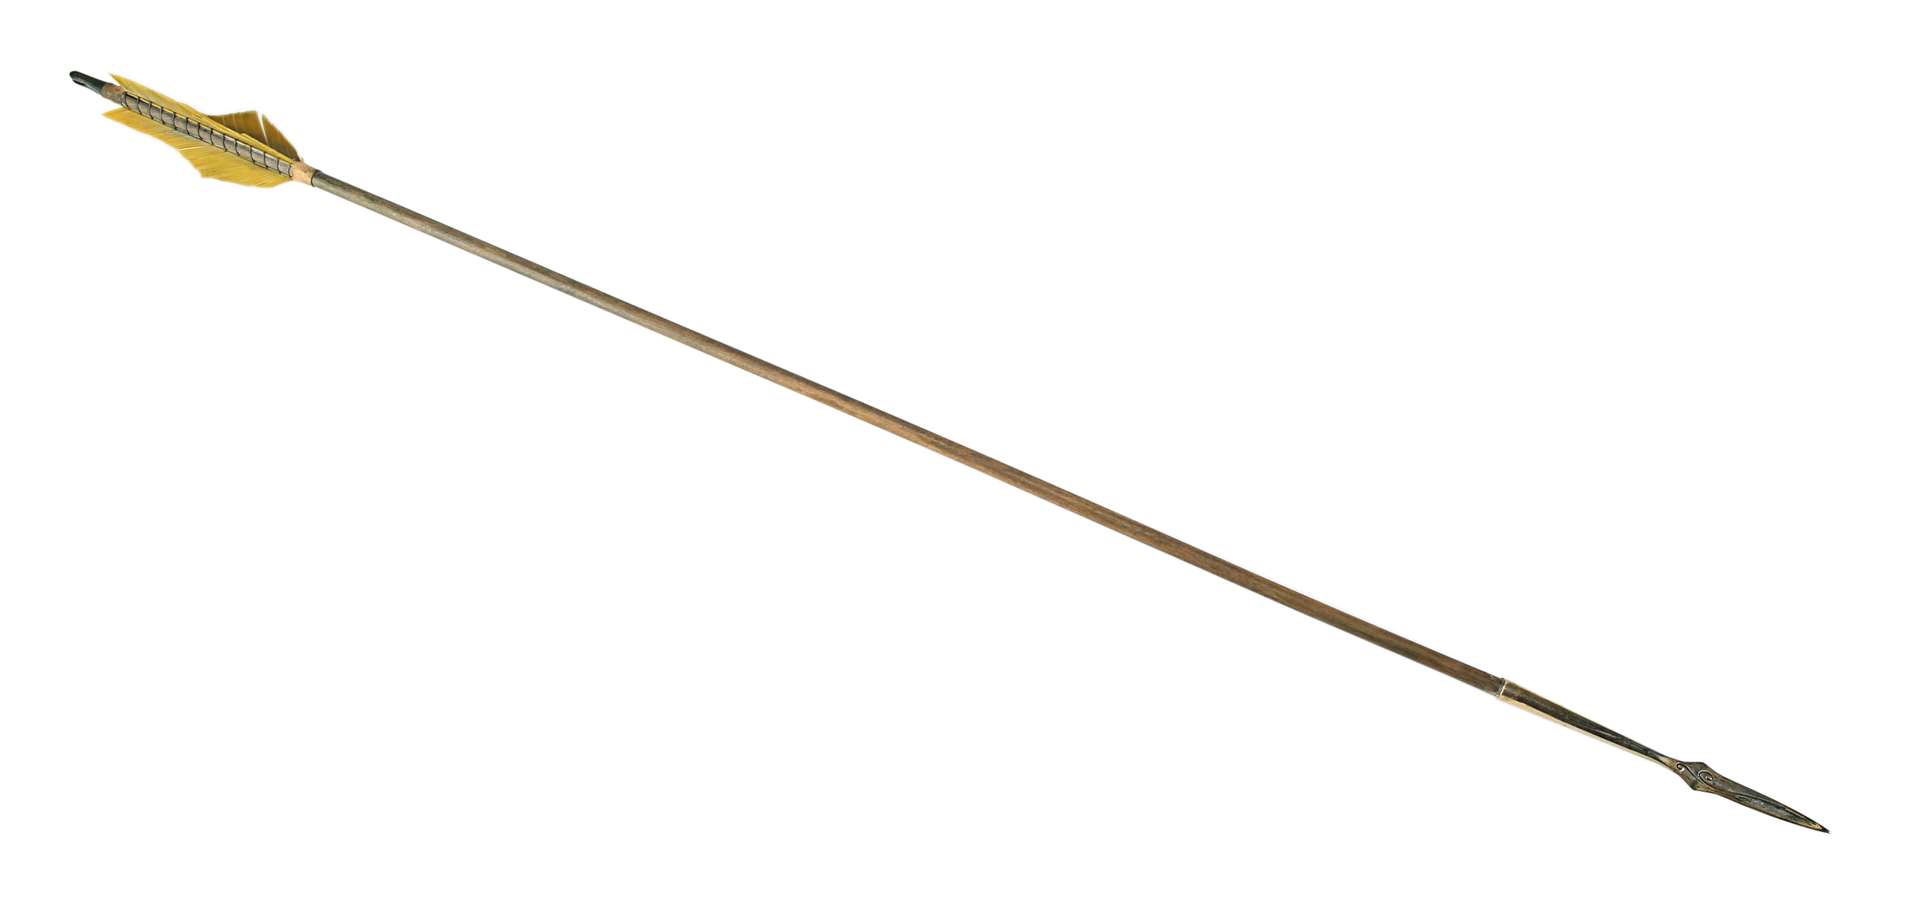 Legolas' arrow from The Lord of the Rings